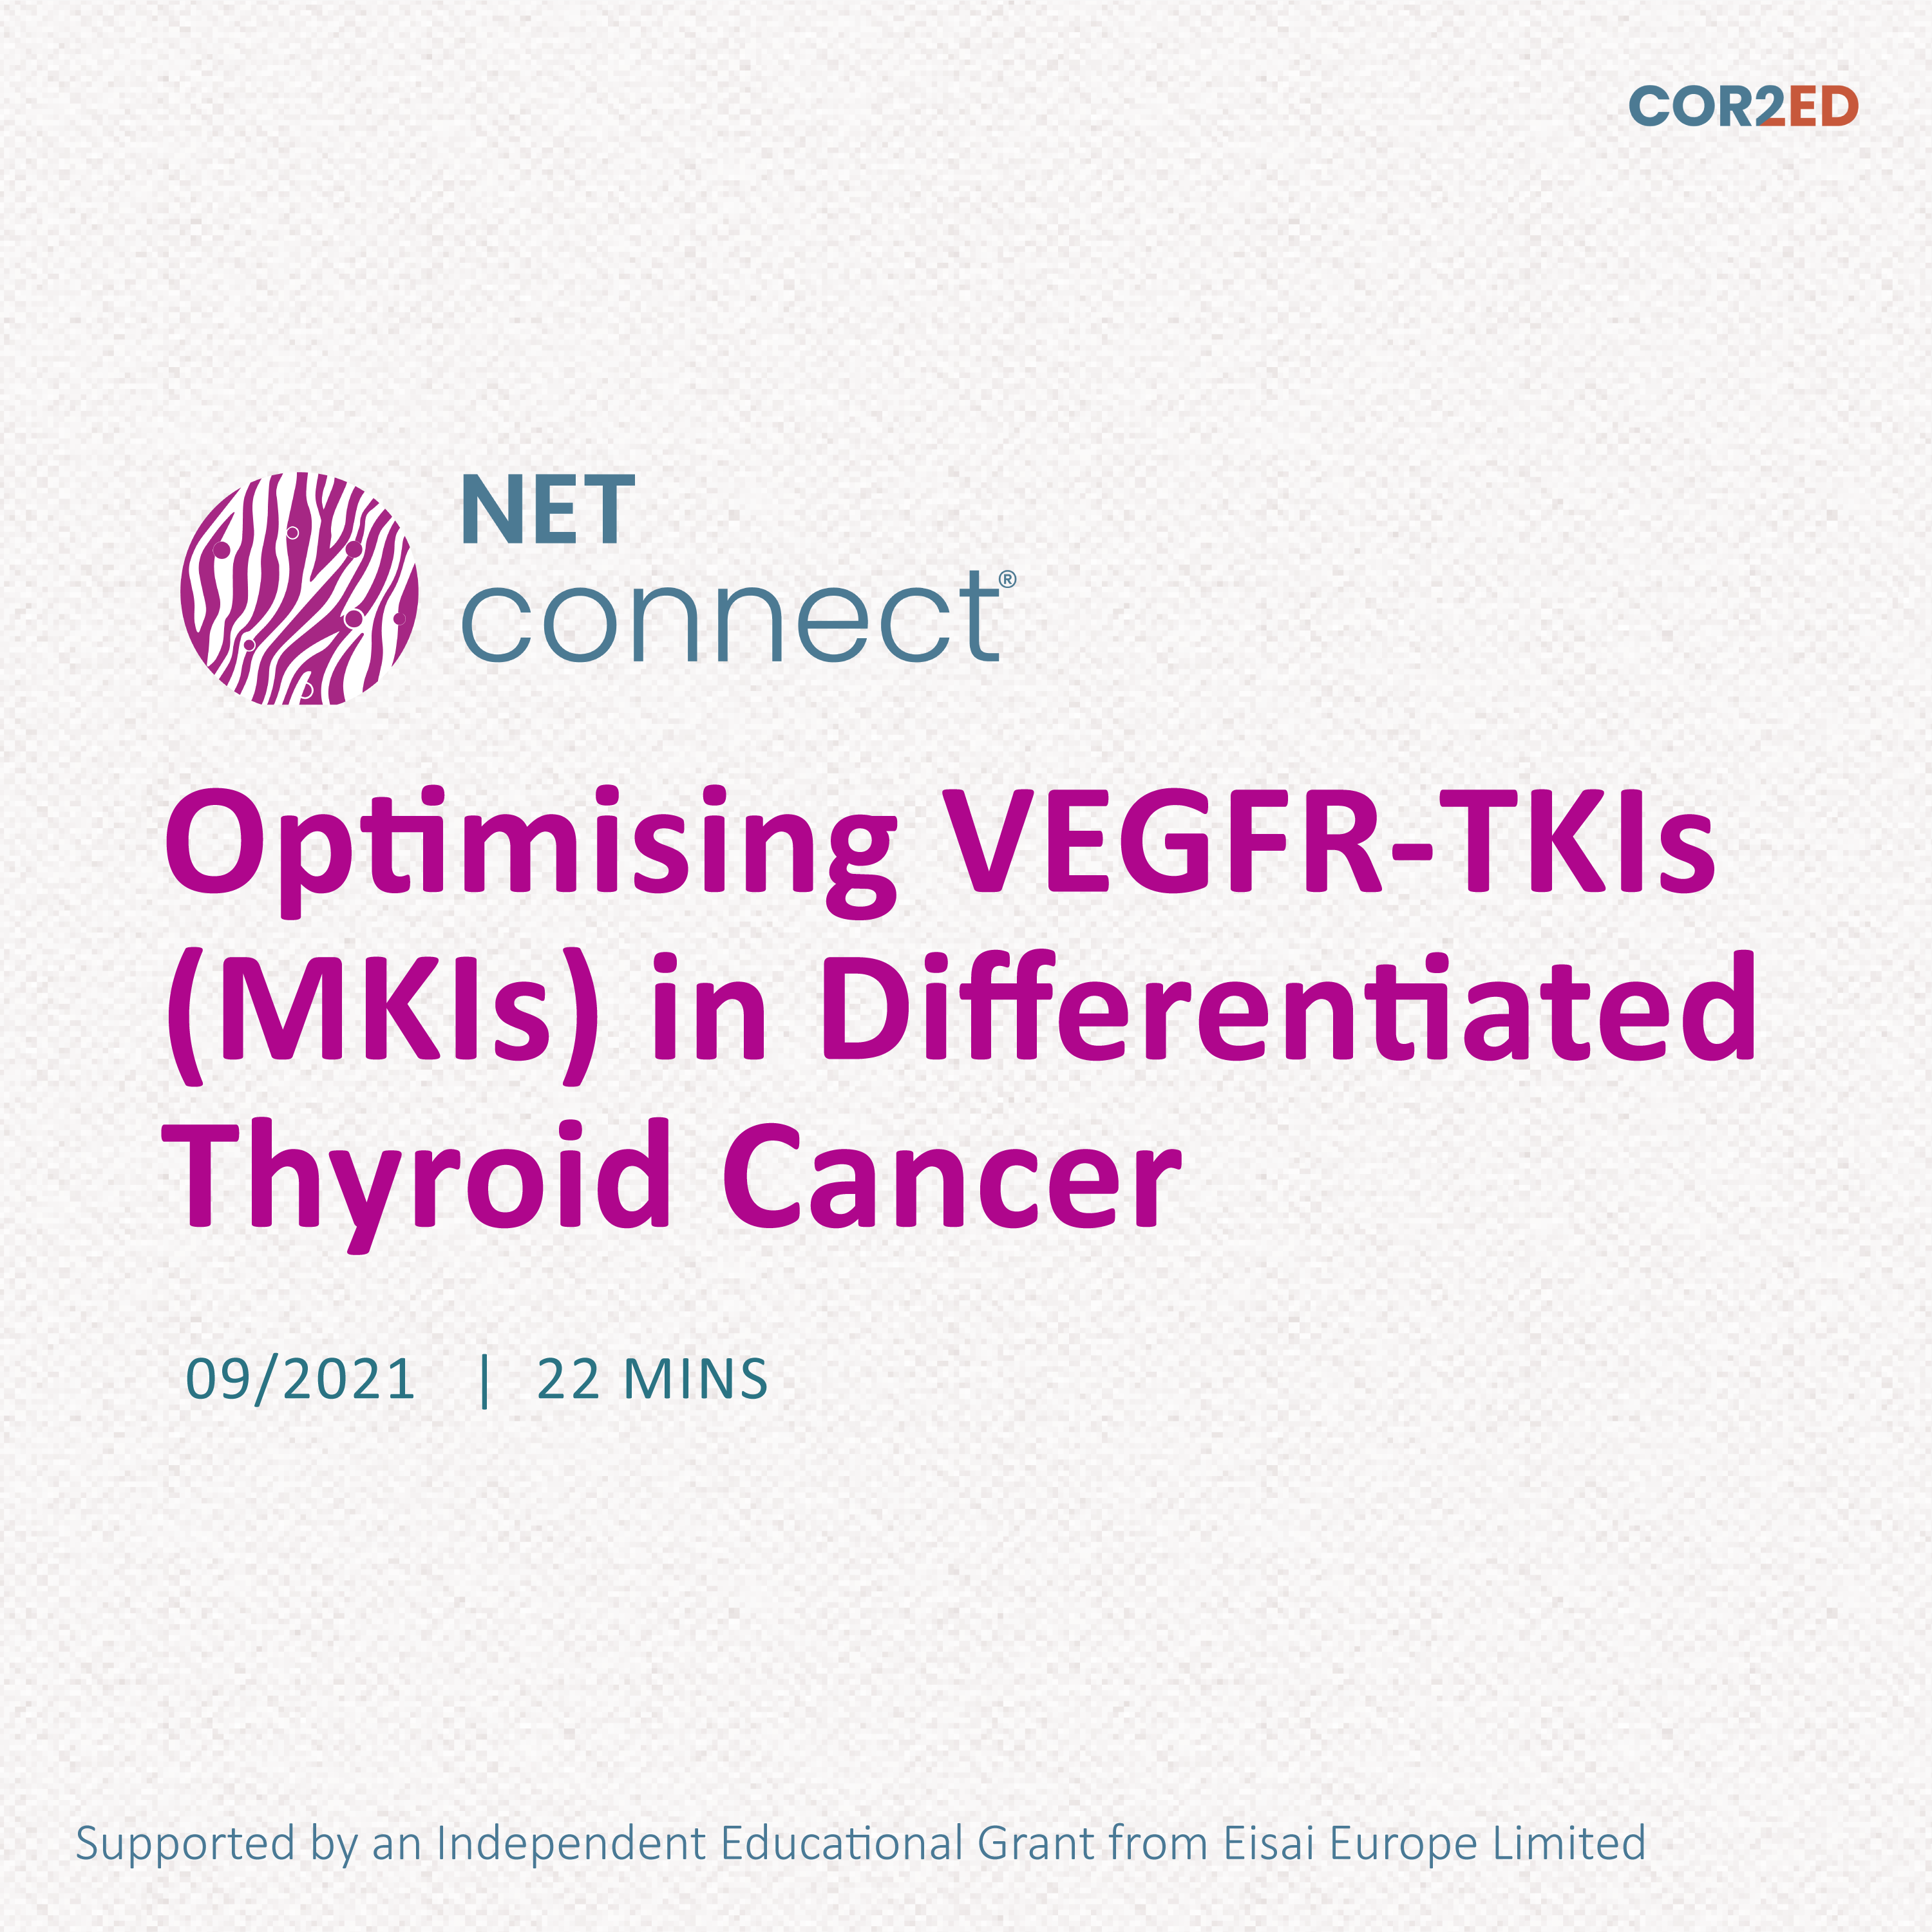 Optimising VEGFR-TKIs (MKIs) in Differentiated Thyroid Cancer